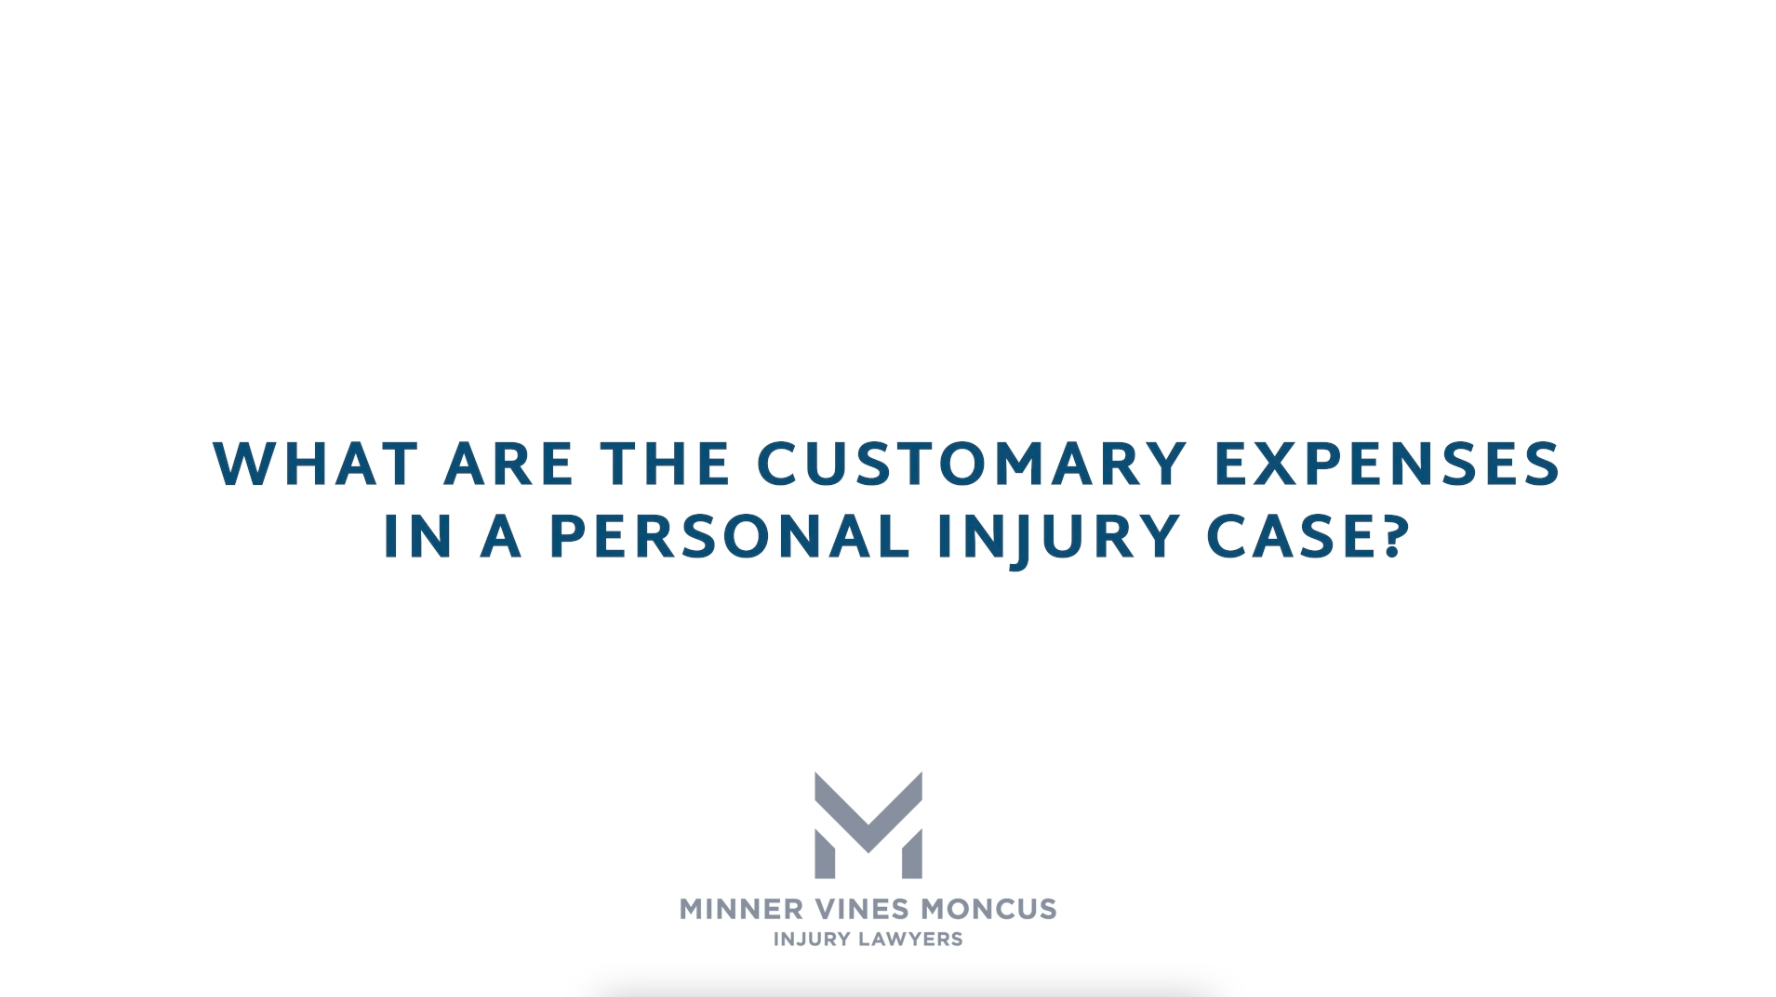 What are the customary expenses in a Personal Injury case?